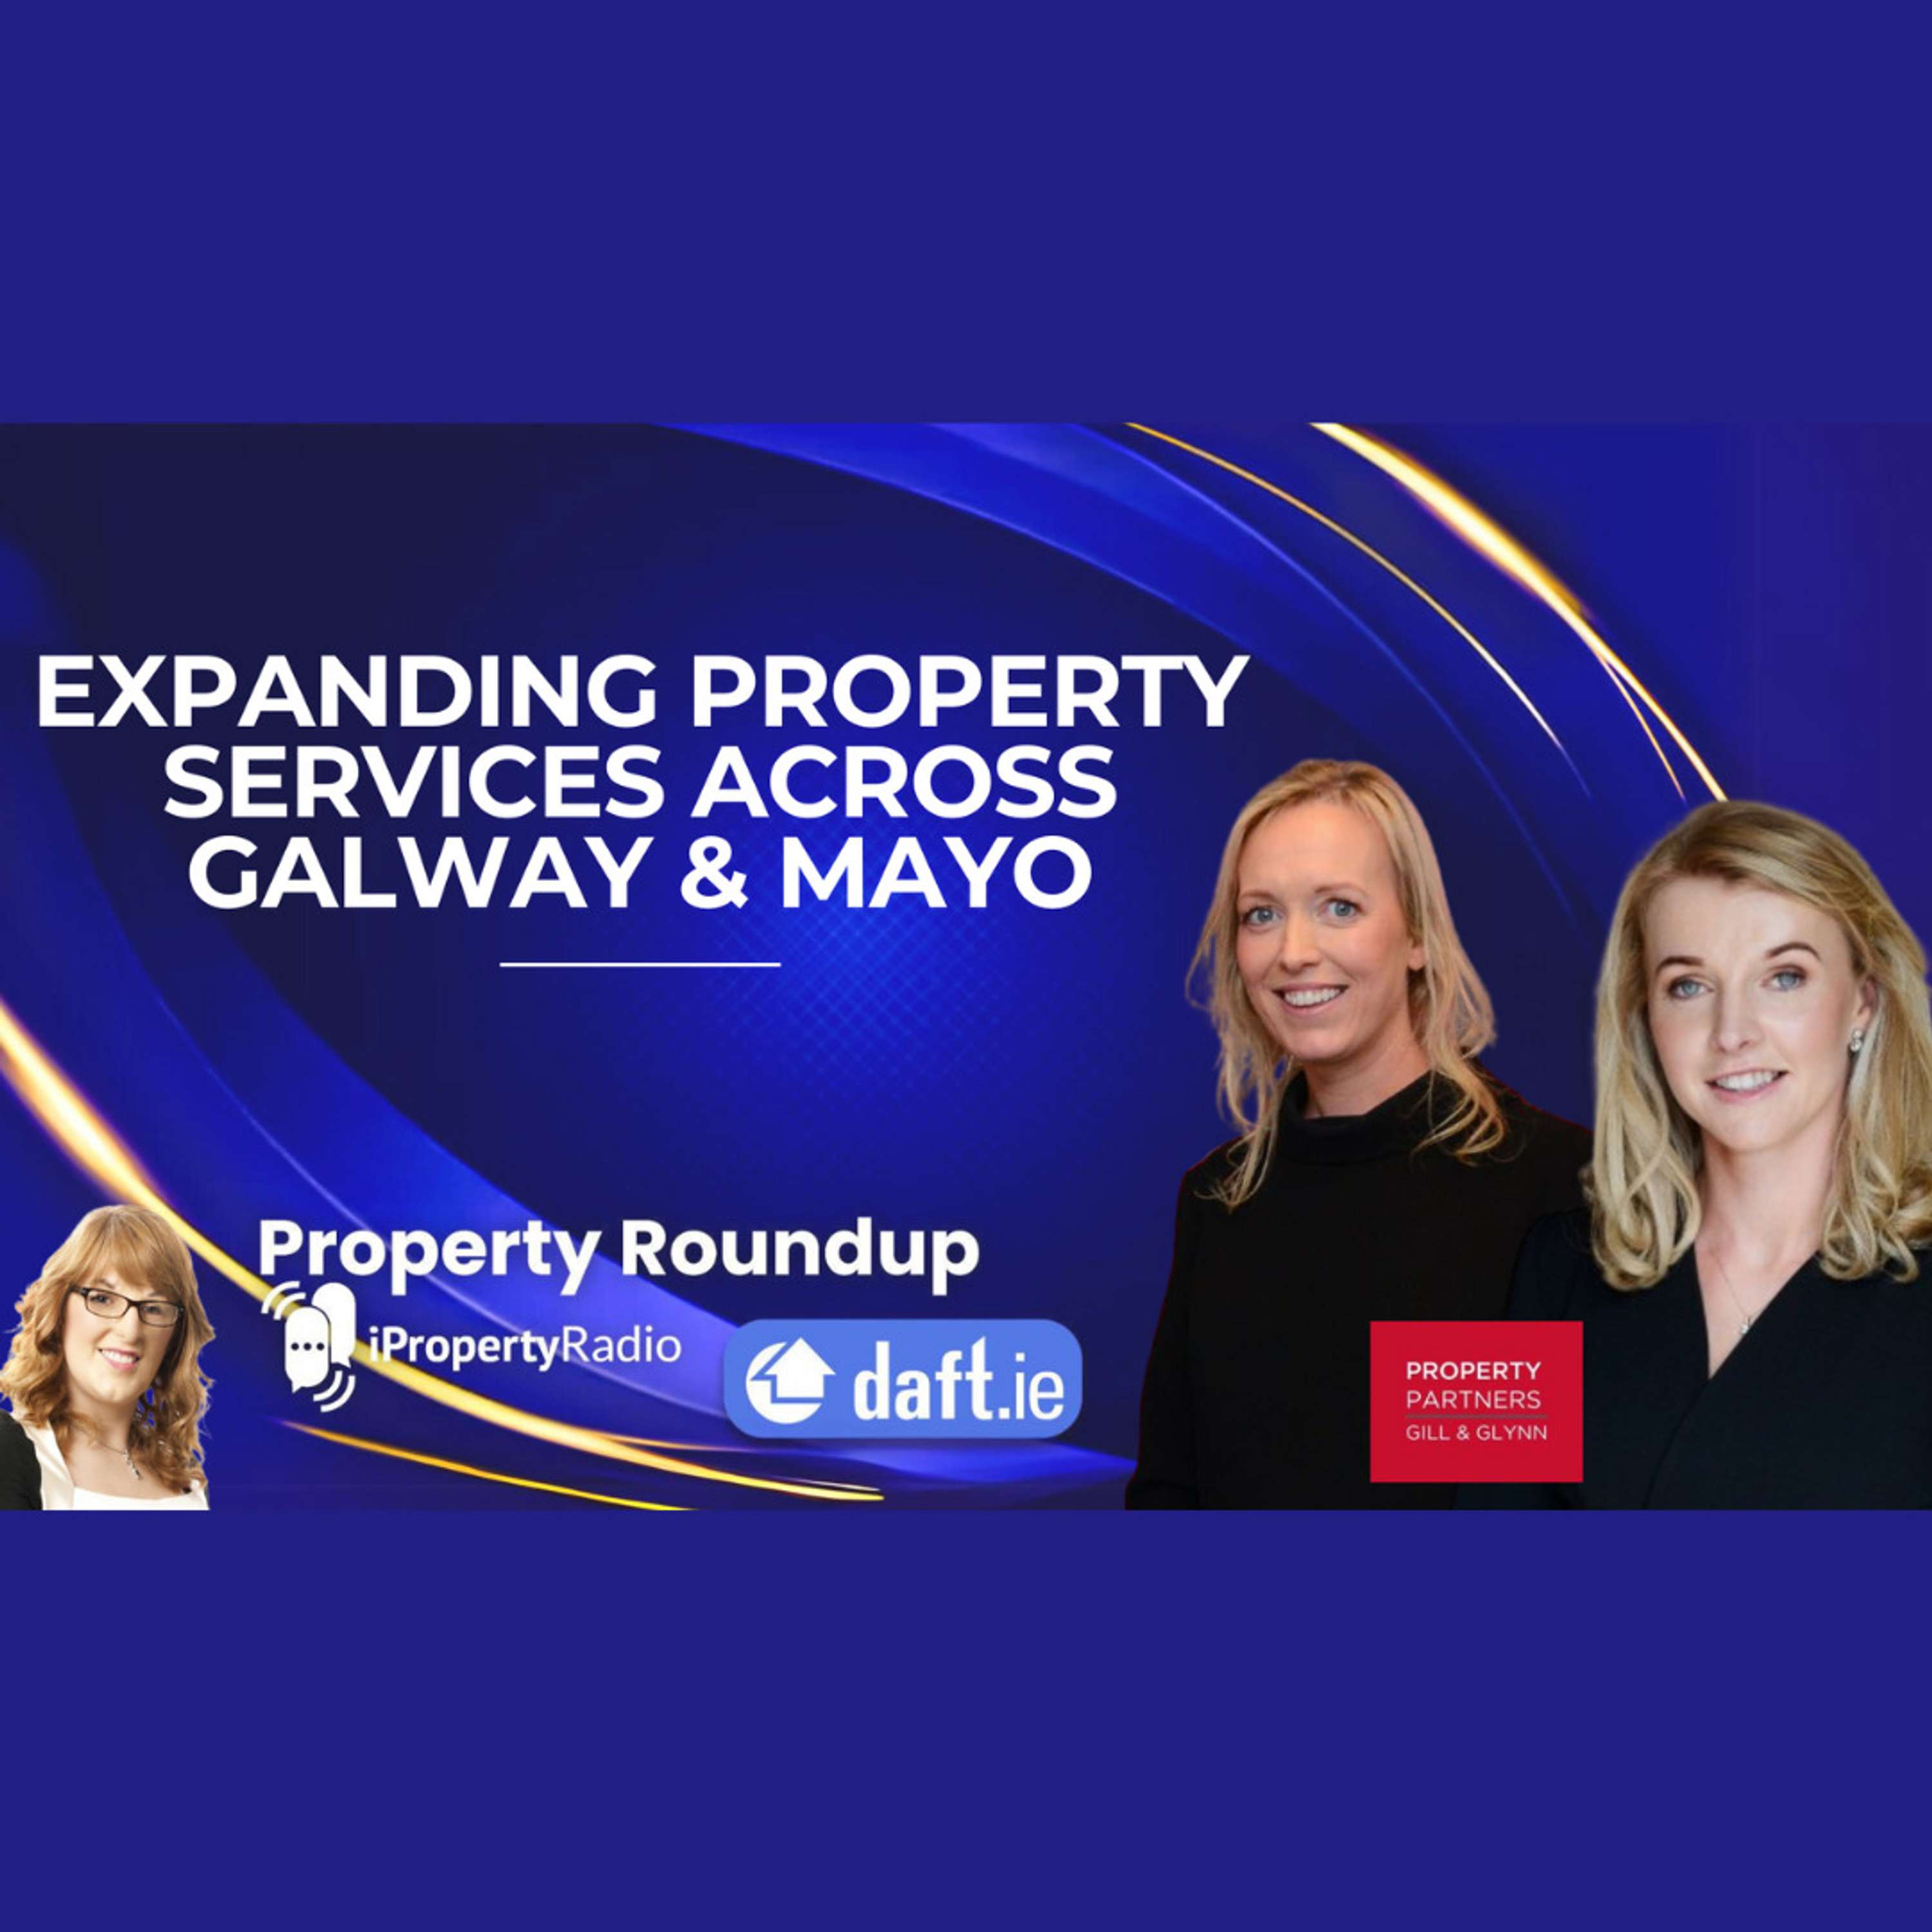 Expanding property services across Galway & Mayo